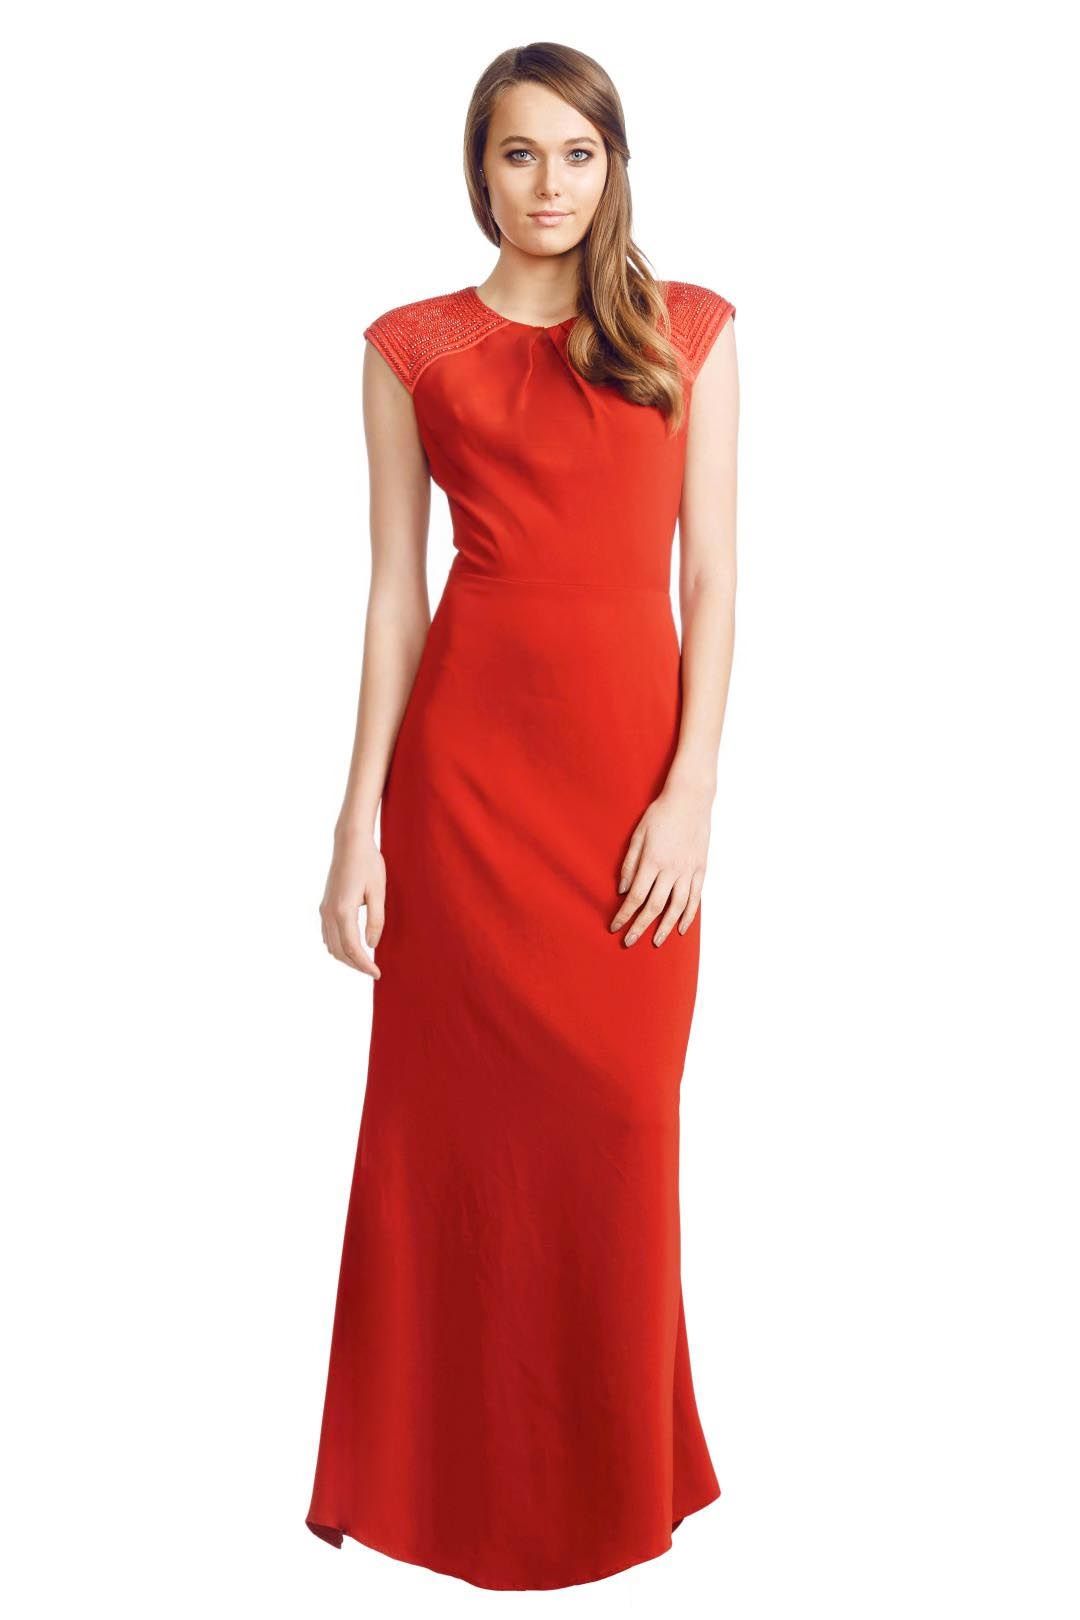 Badgley Mischka - Bedazzled Gown - Red - Front